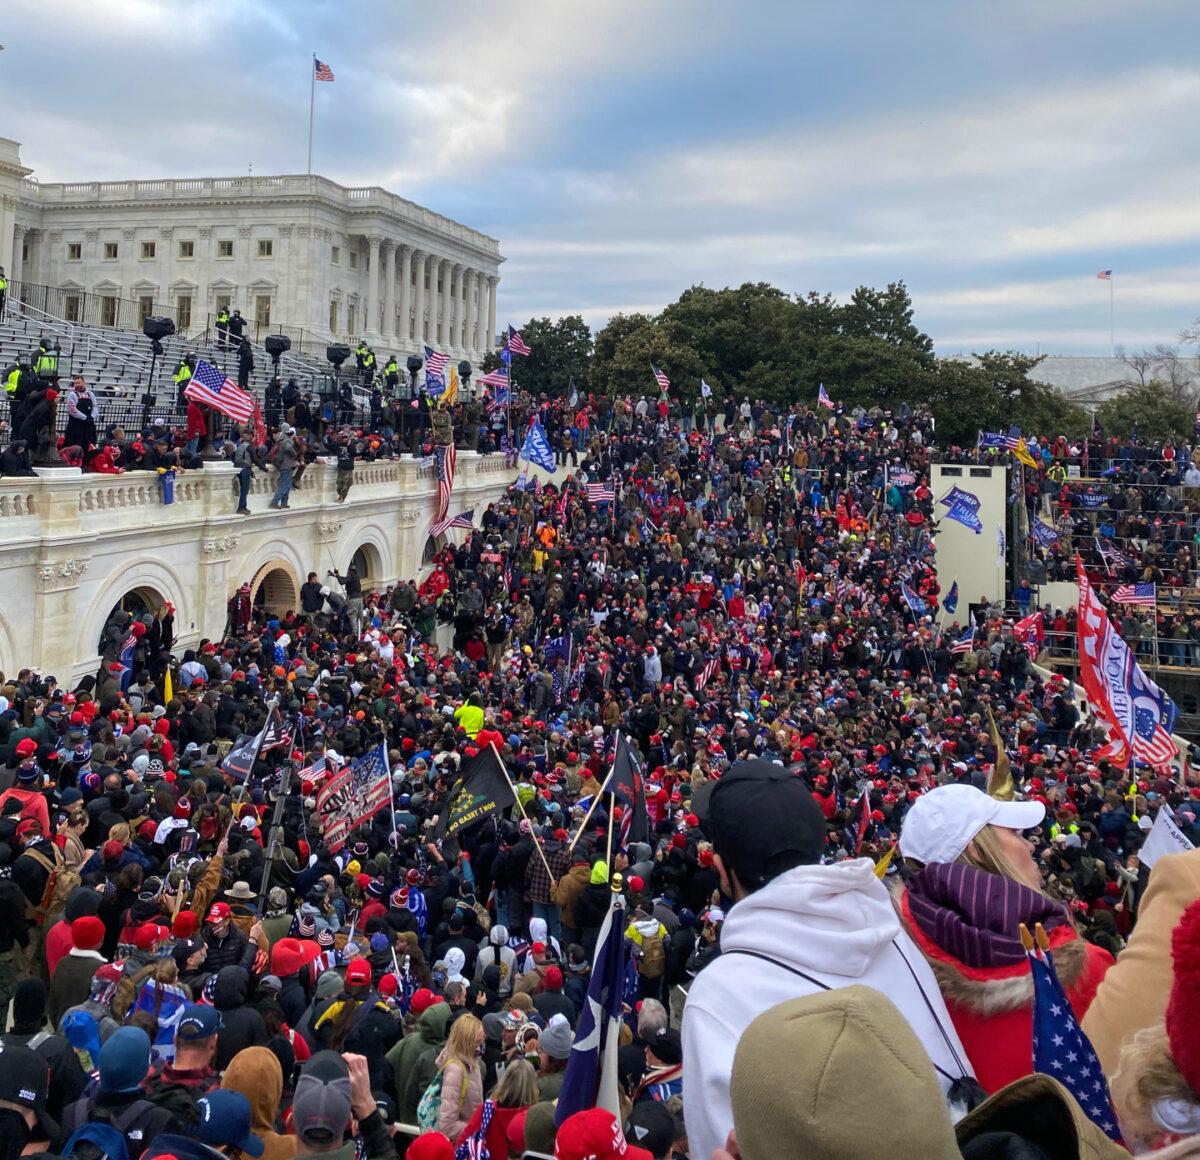 Protesters mass in front of the U.S. Capitol building in Washington on Jan. 6, 2021. (Courtesy of Mark Simon)